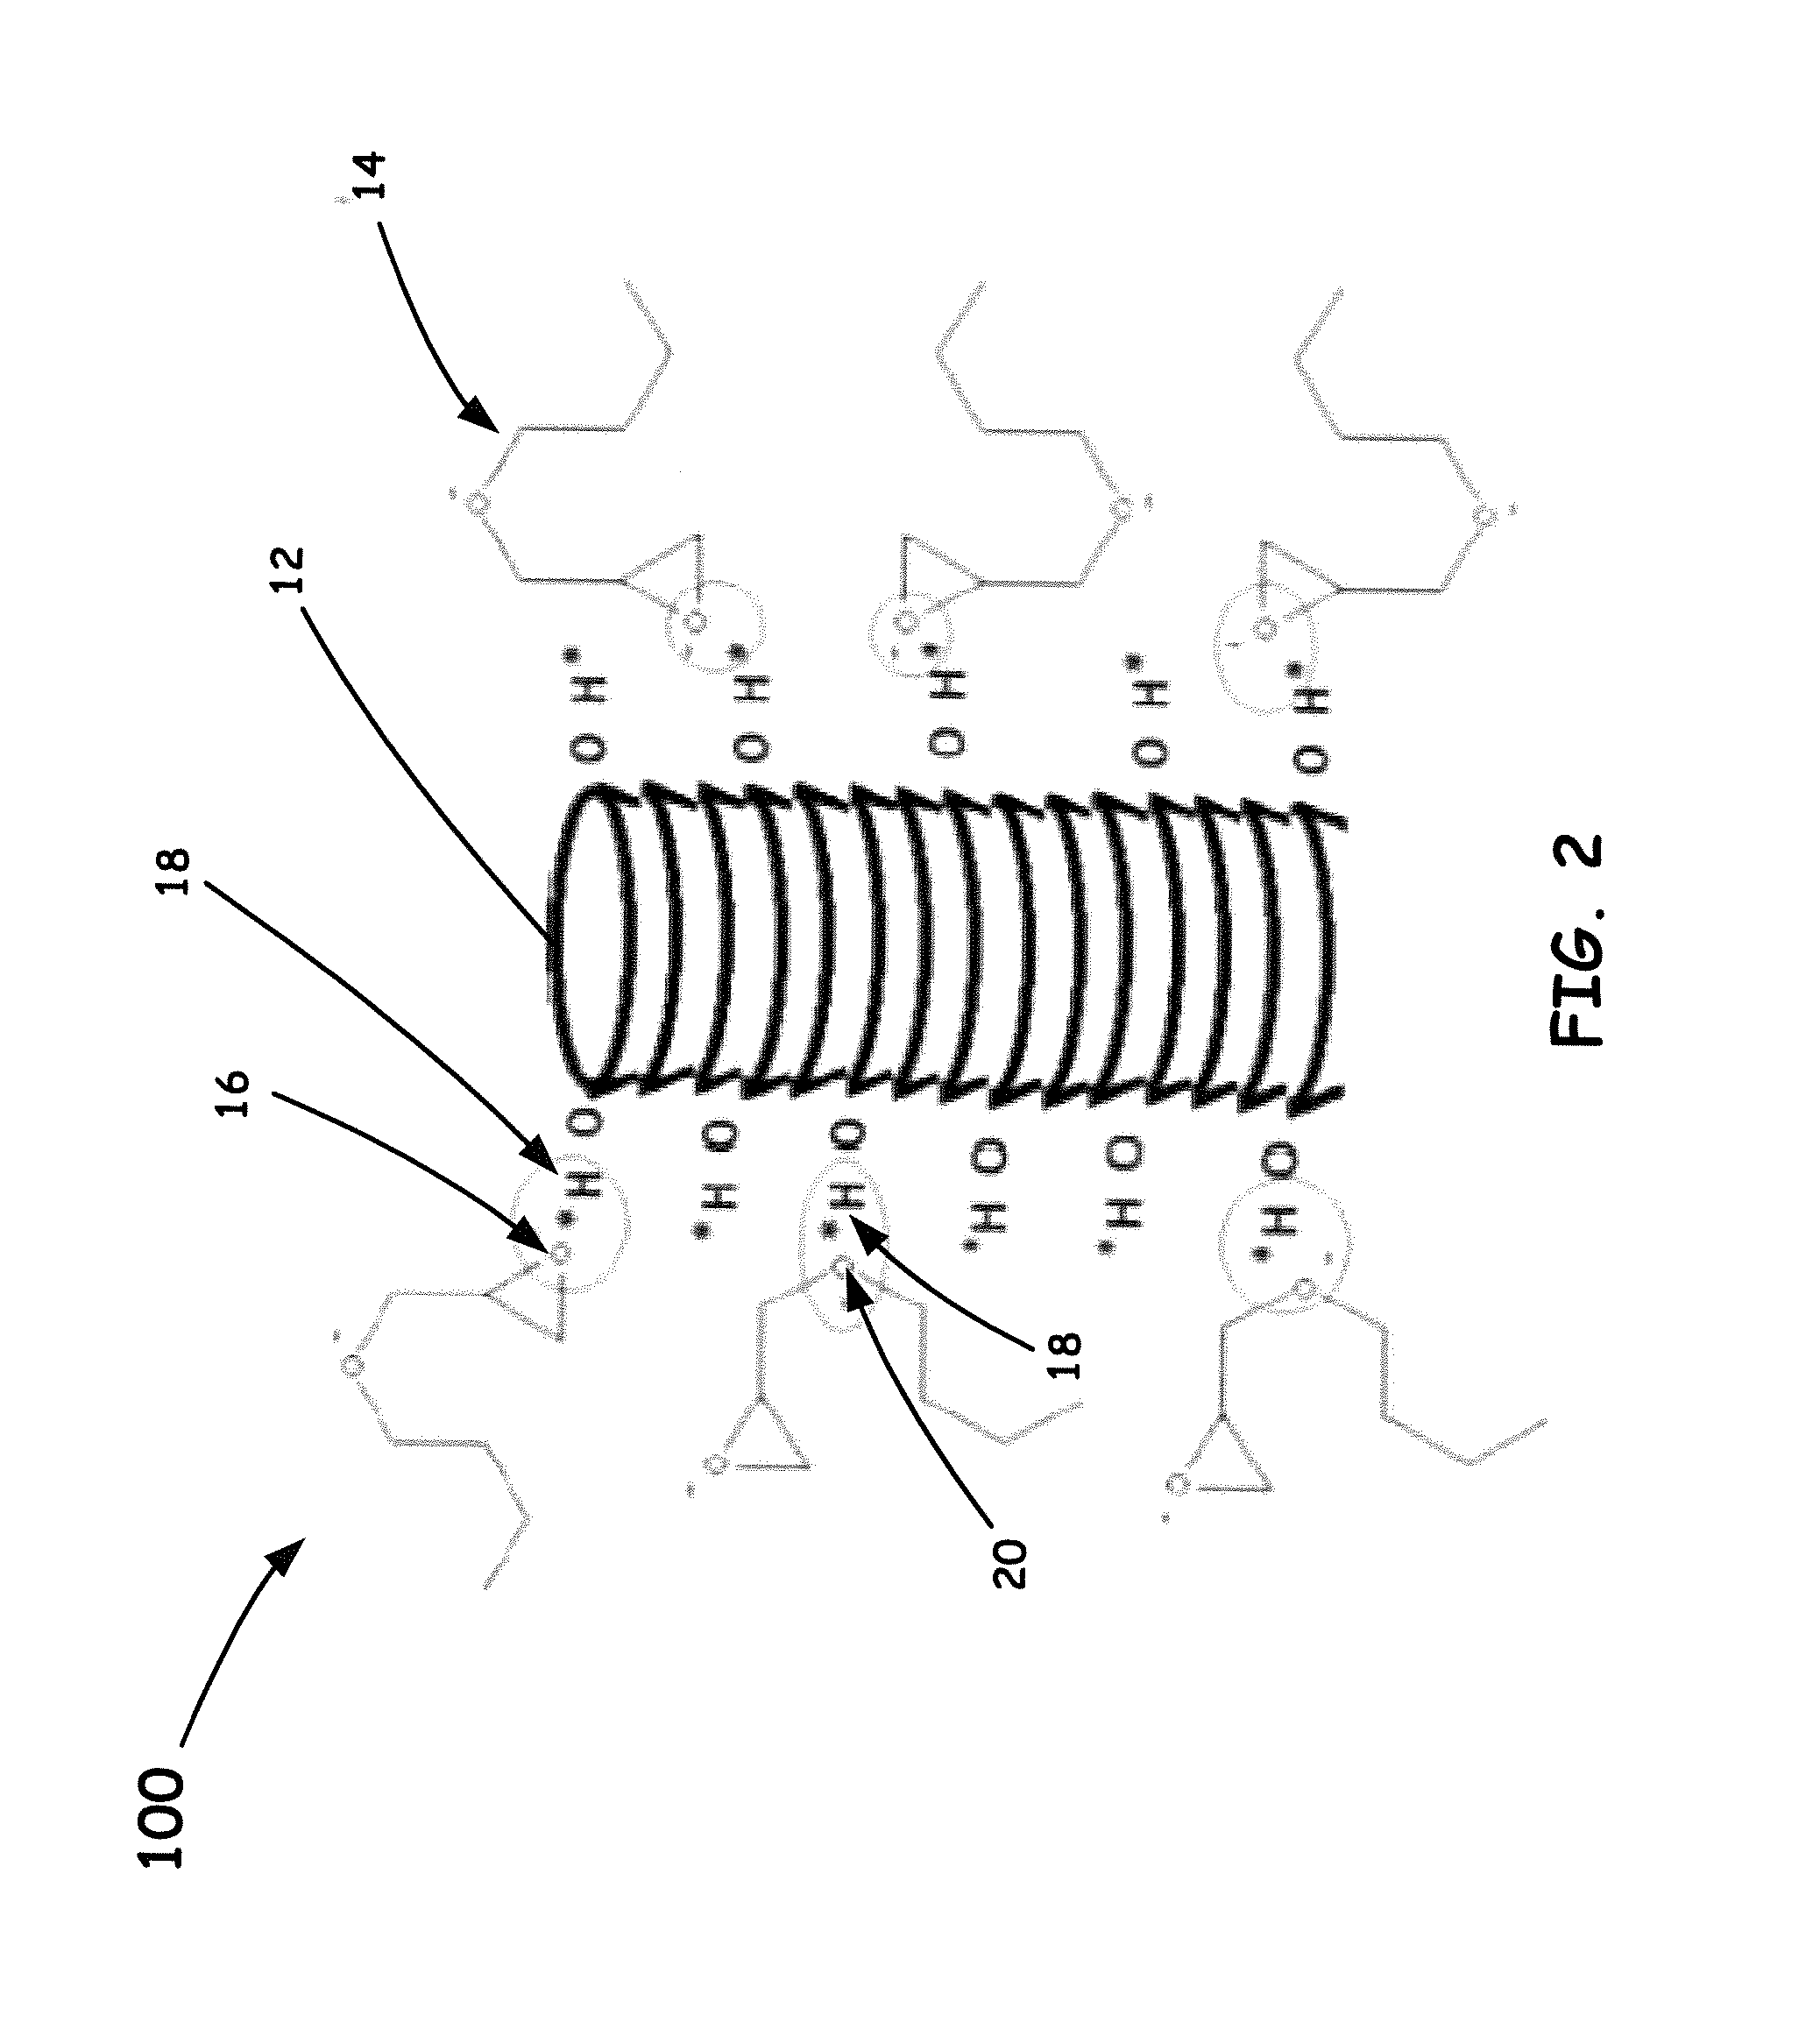 Method for conversion of dry nanomaterials into liquid nano-agents for fabrication of polymer nanocomposites and fiber reinforced composites